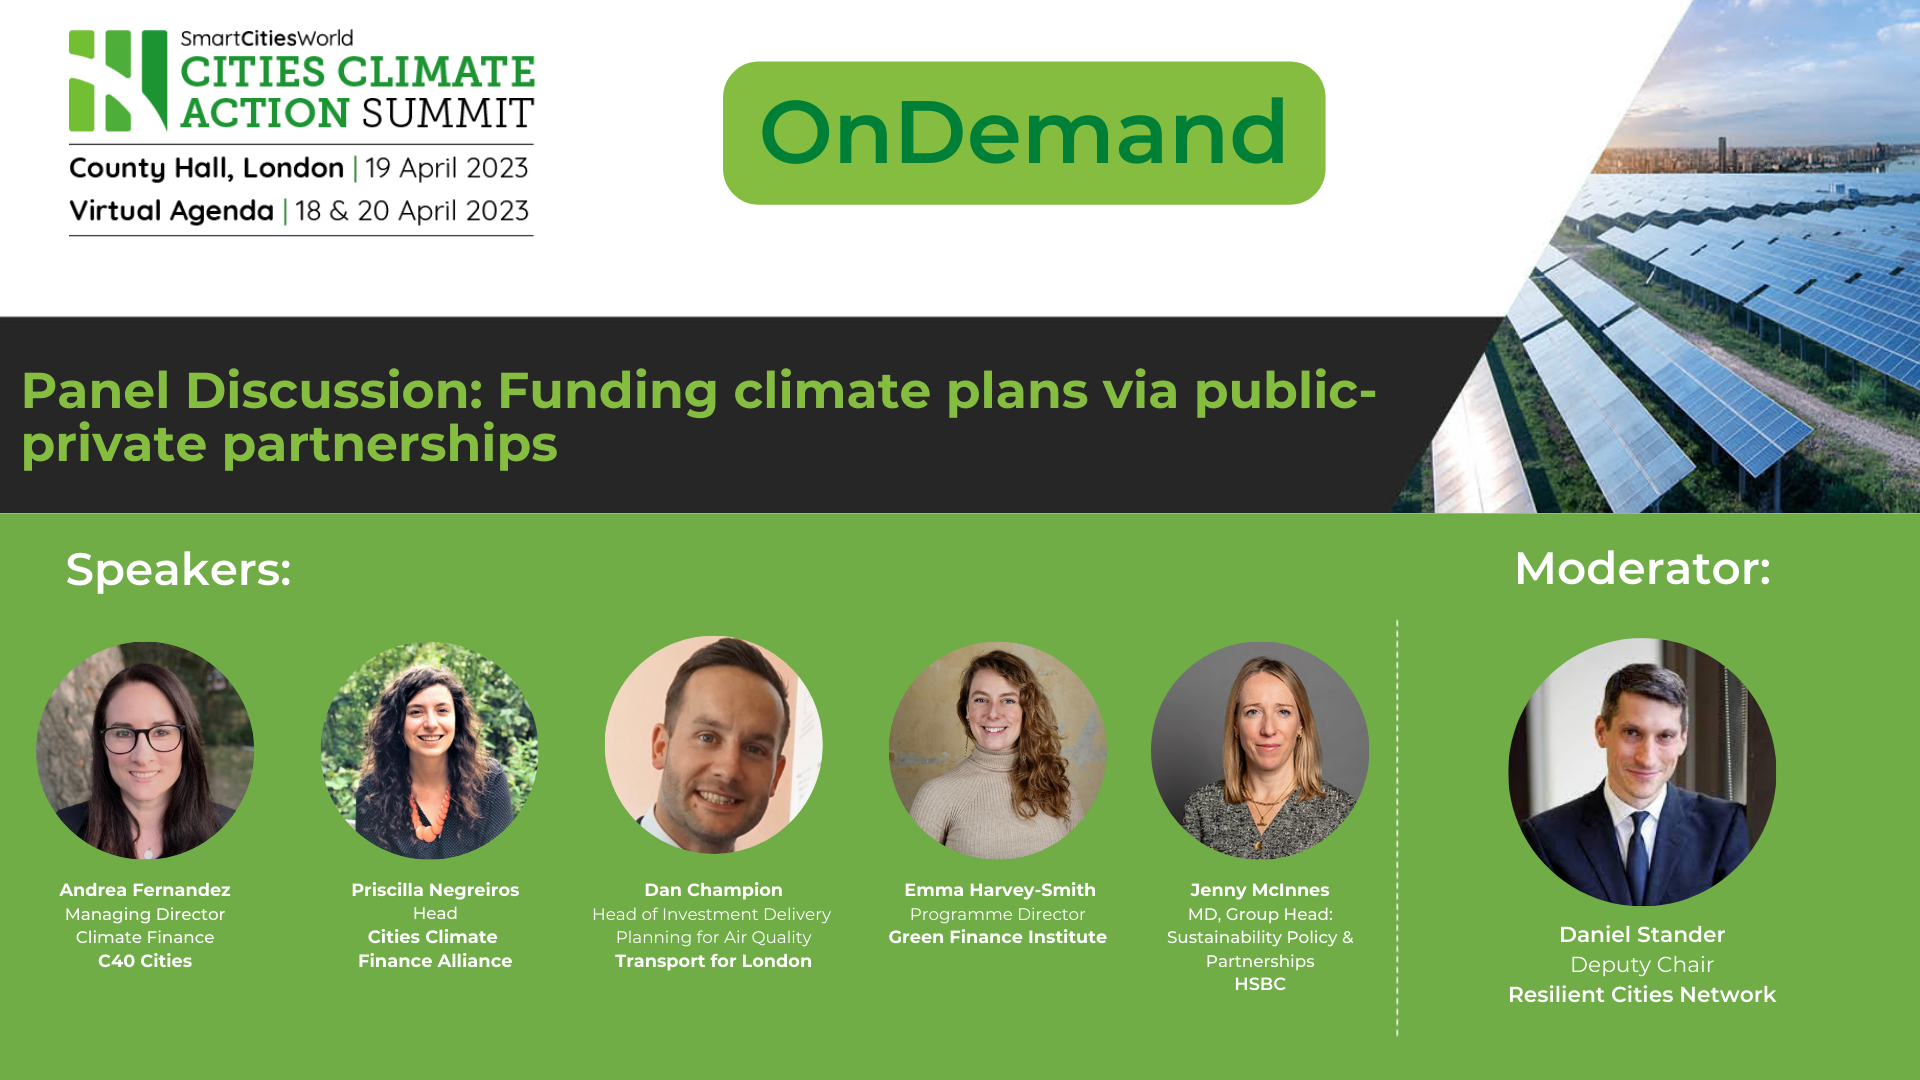 OnDemand Panel discussion: Funding climate plans via public-private partnerships